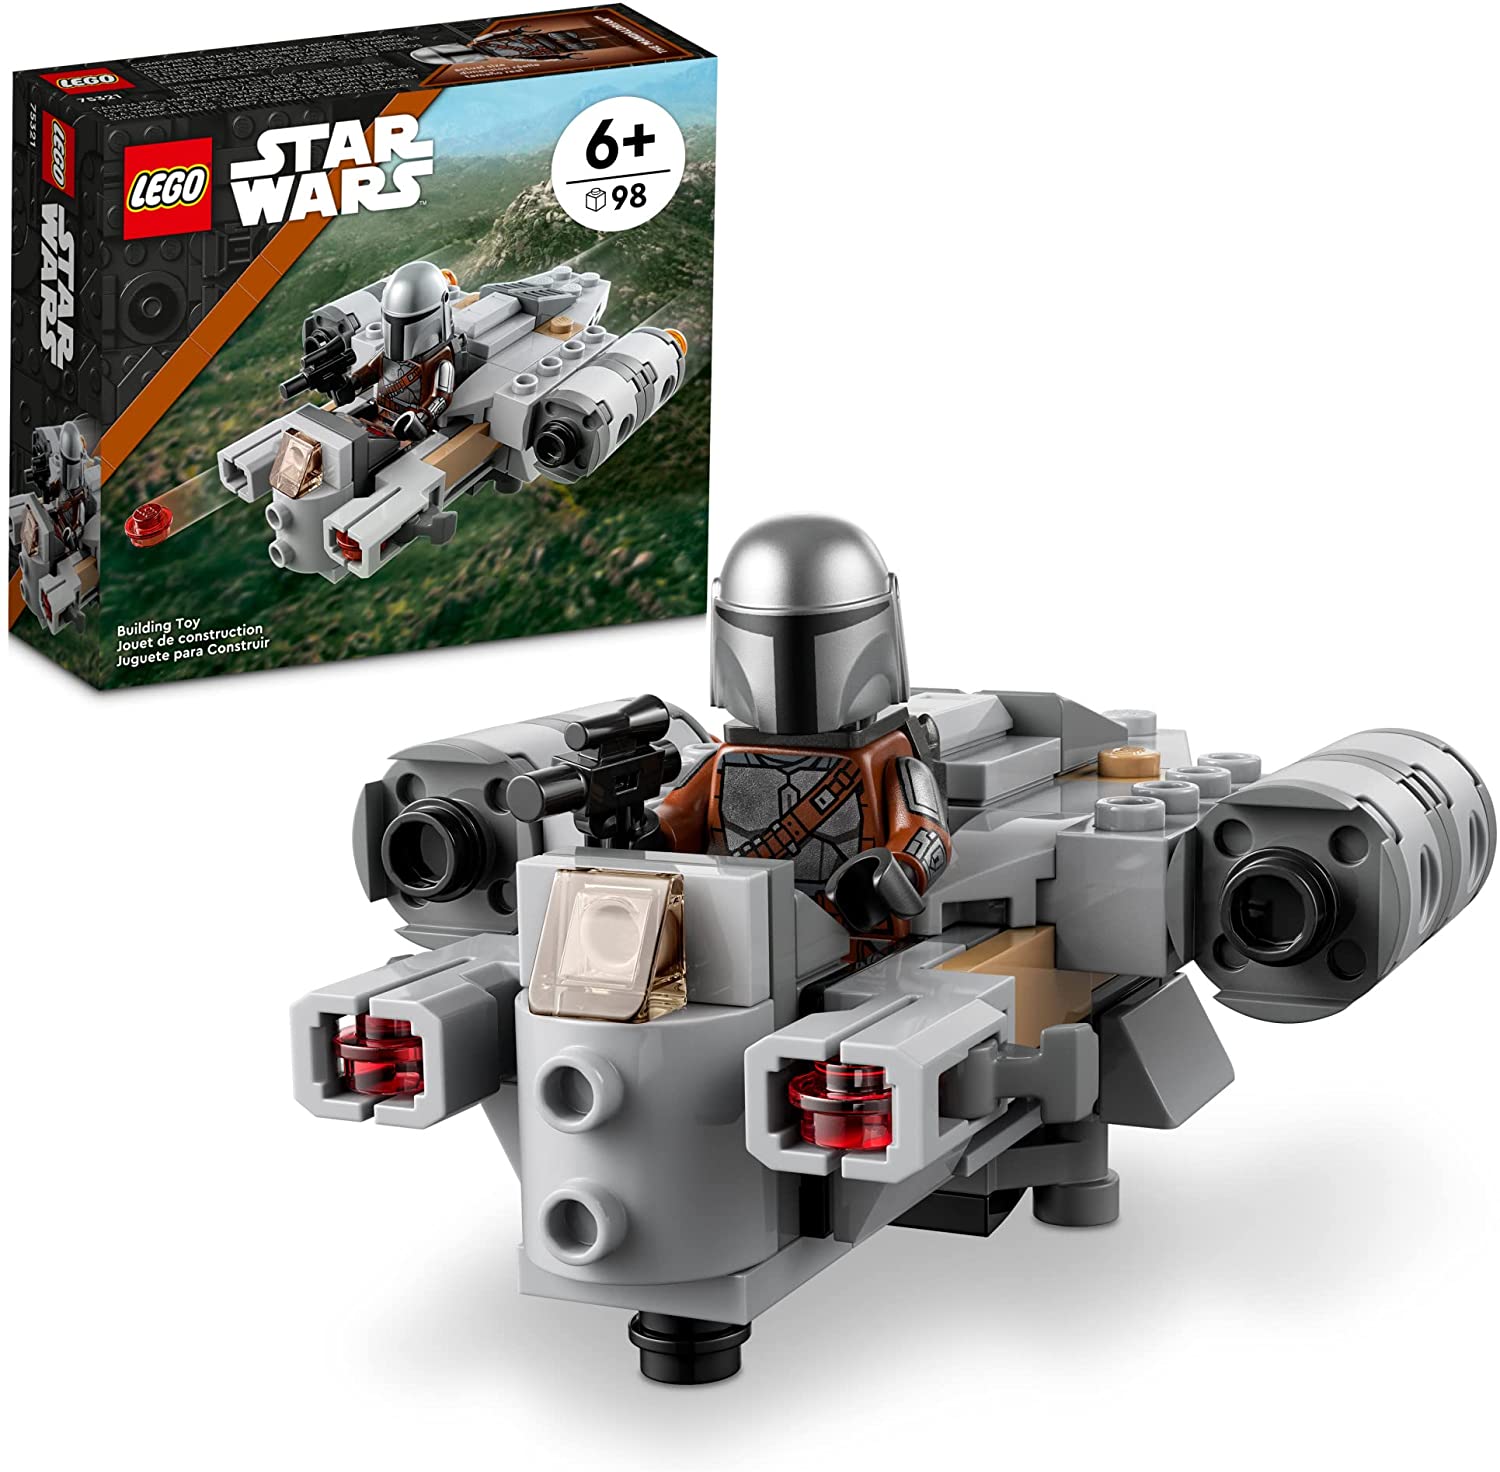 Amazon: Spend $50 or More on Select LEGO Building Sets, Get